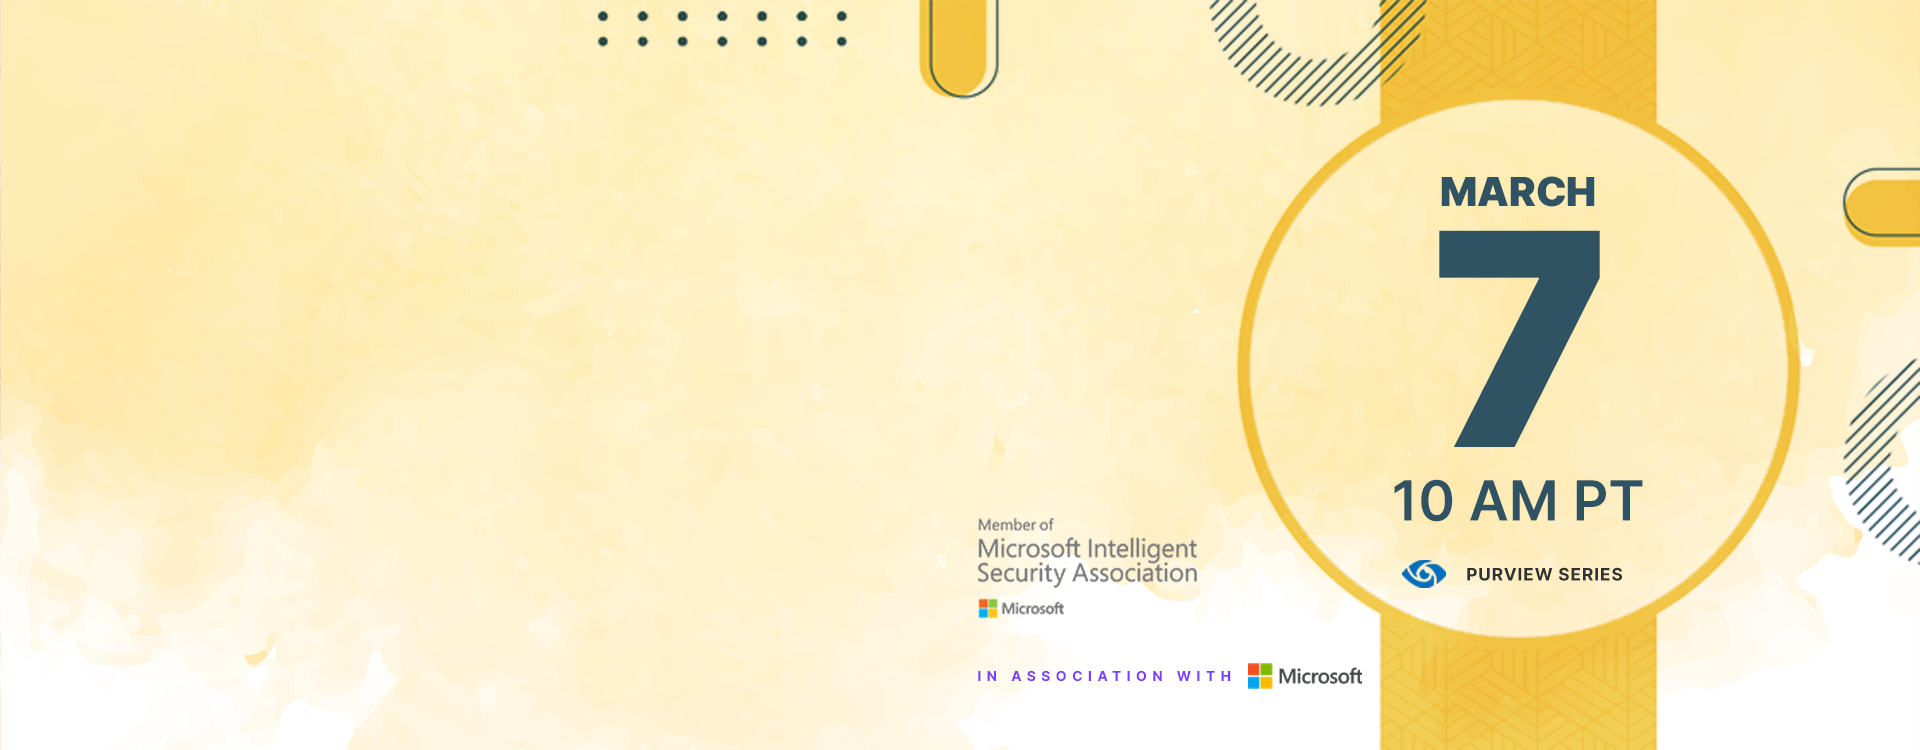 Protect your organization by staying compliant using Microsoft Purview